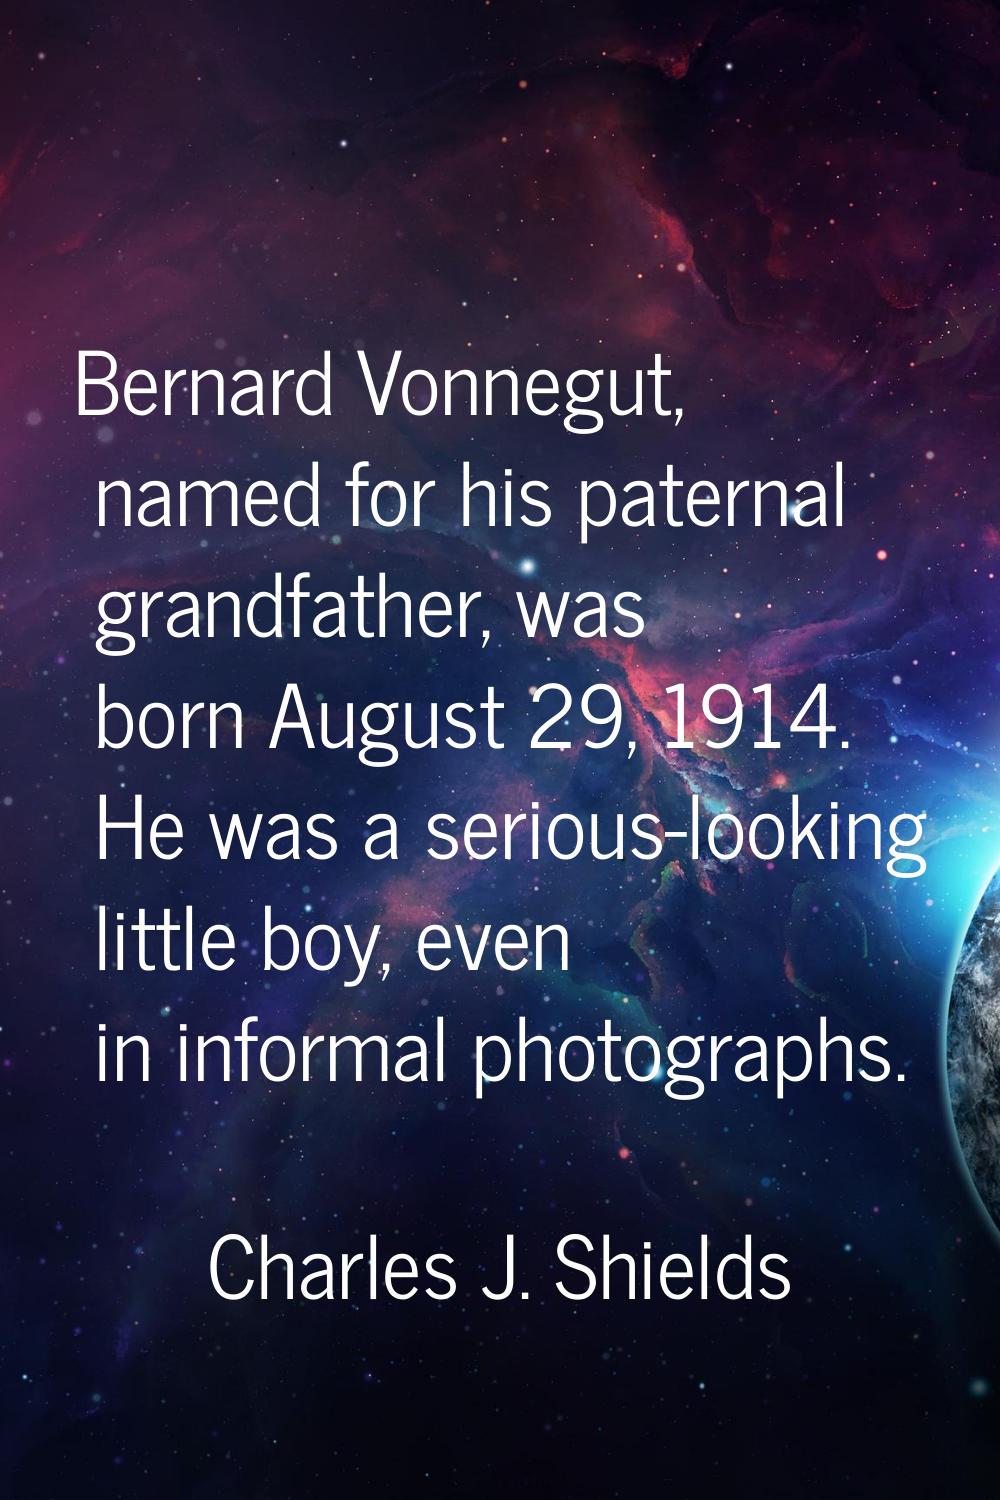 Bernard Vonnegut, named for his paternal grandfather, was born August 29, 1914. He was a serious-lo